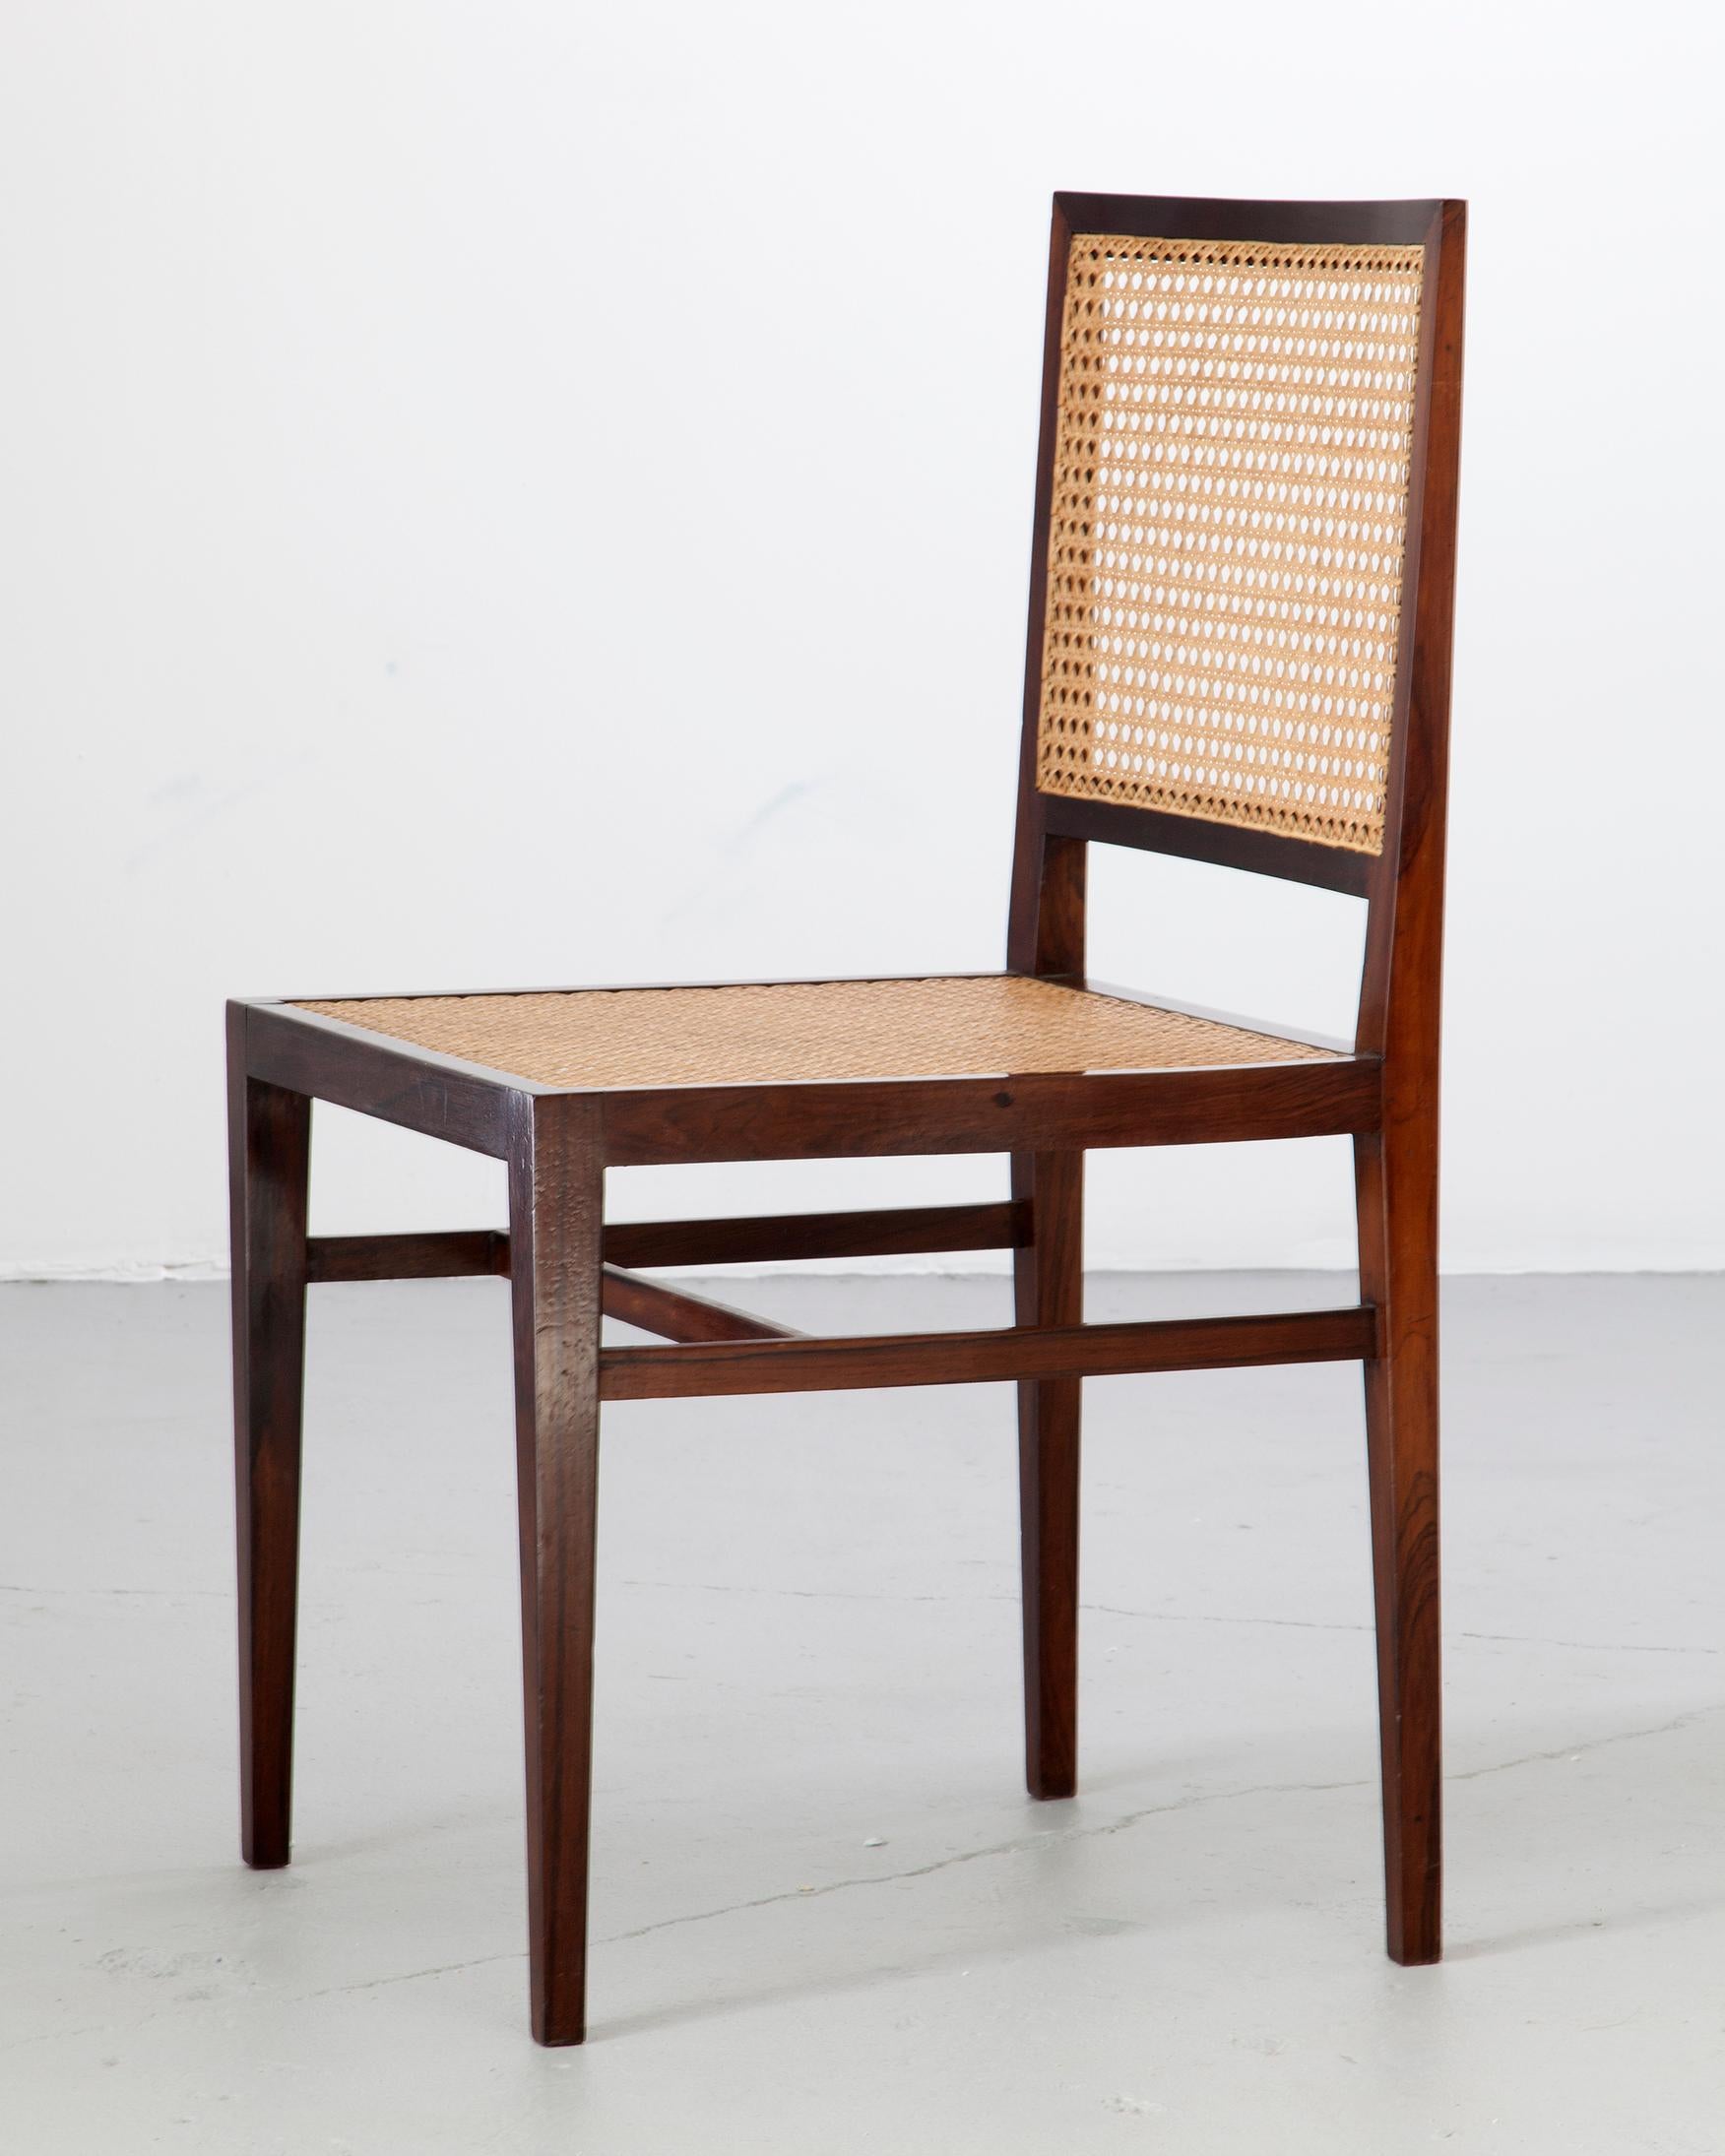 Modern Dining Chair in Rosewood and Cane by Branco & Preto, 1950s